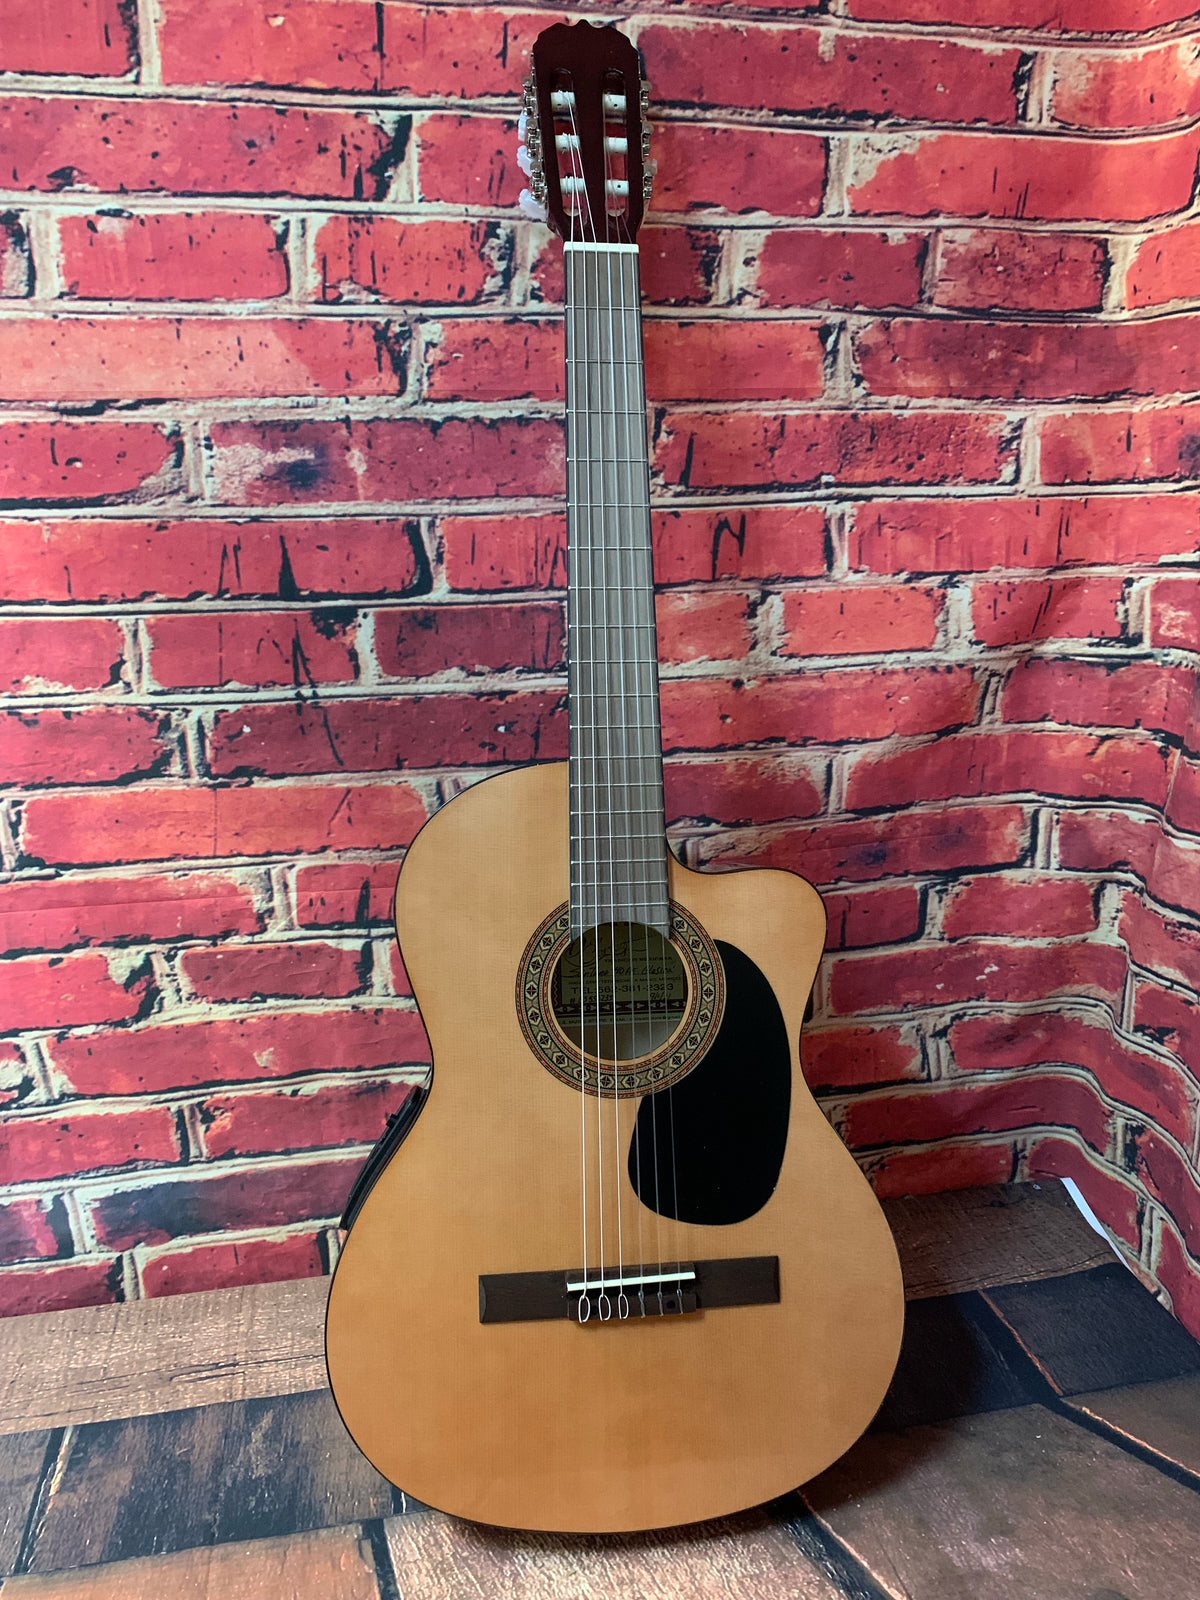 https://www.usmusicstore.shop/wp-content/uploads/1690/39/all-our-valued-clients-will-get-a-fair-price-and-exceptional-service-from-don-cortez-guitarra-clasica-santana-40-a-ele-cedro-rojo-us-music-store_1.jpg